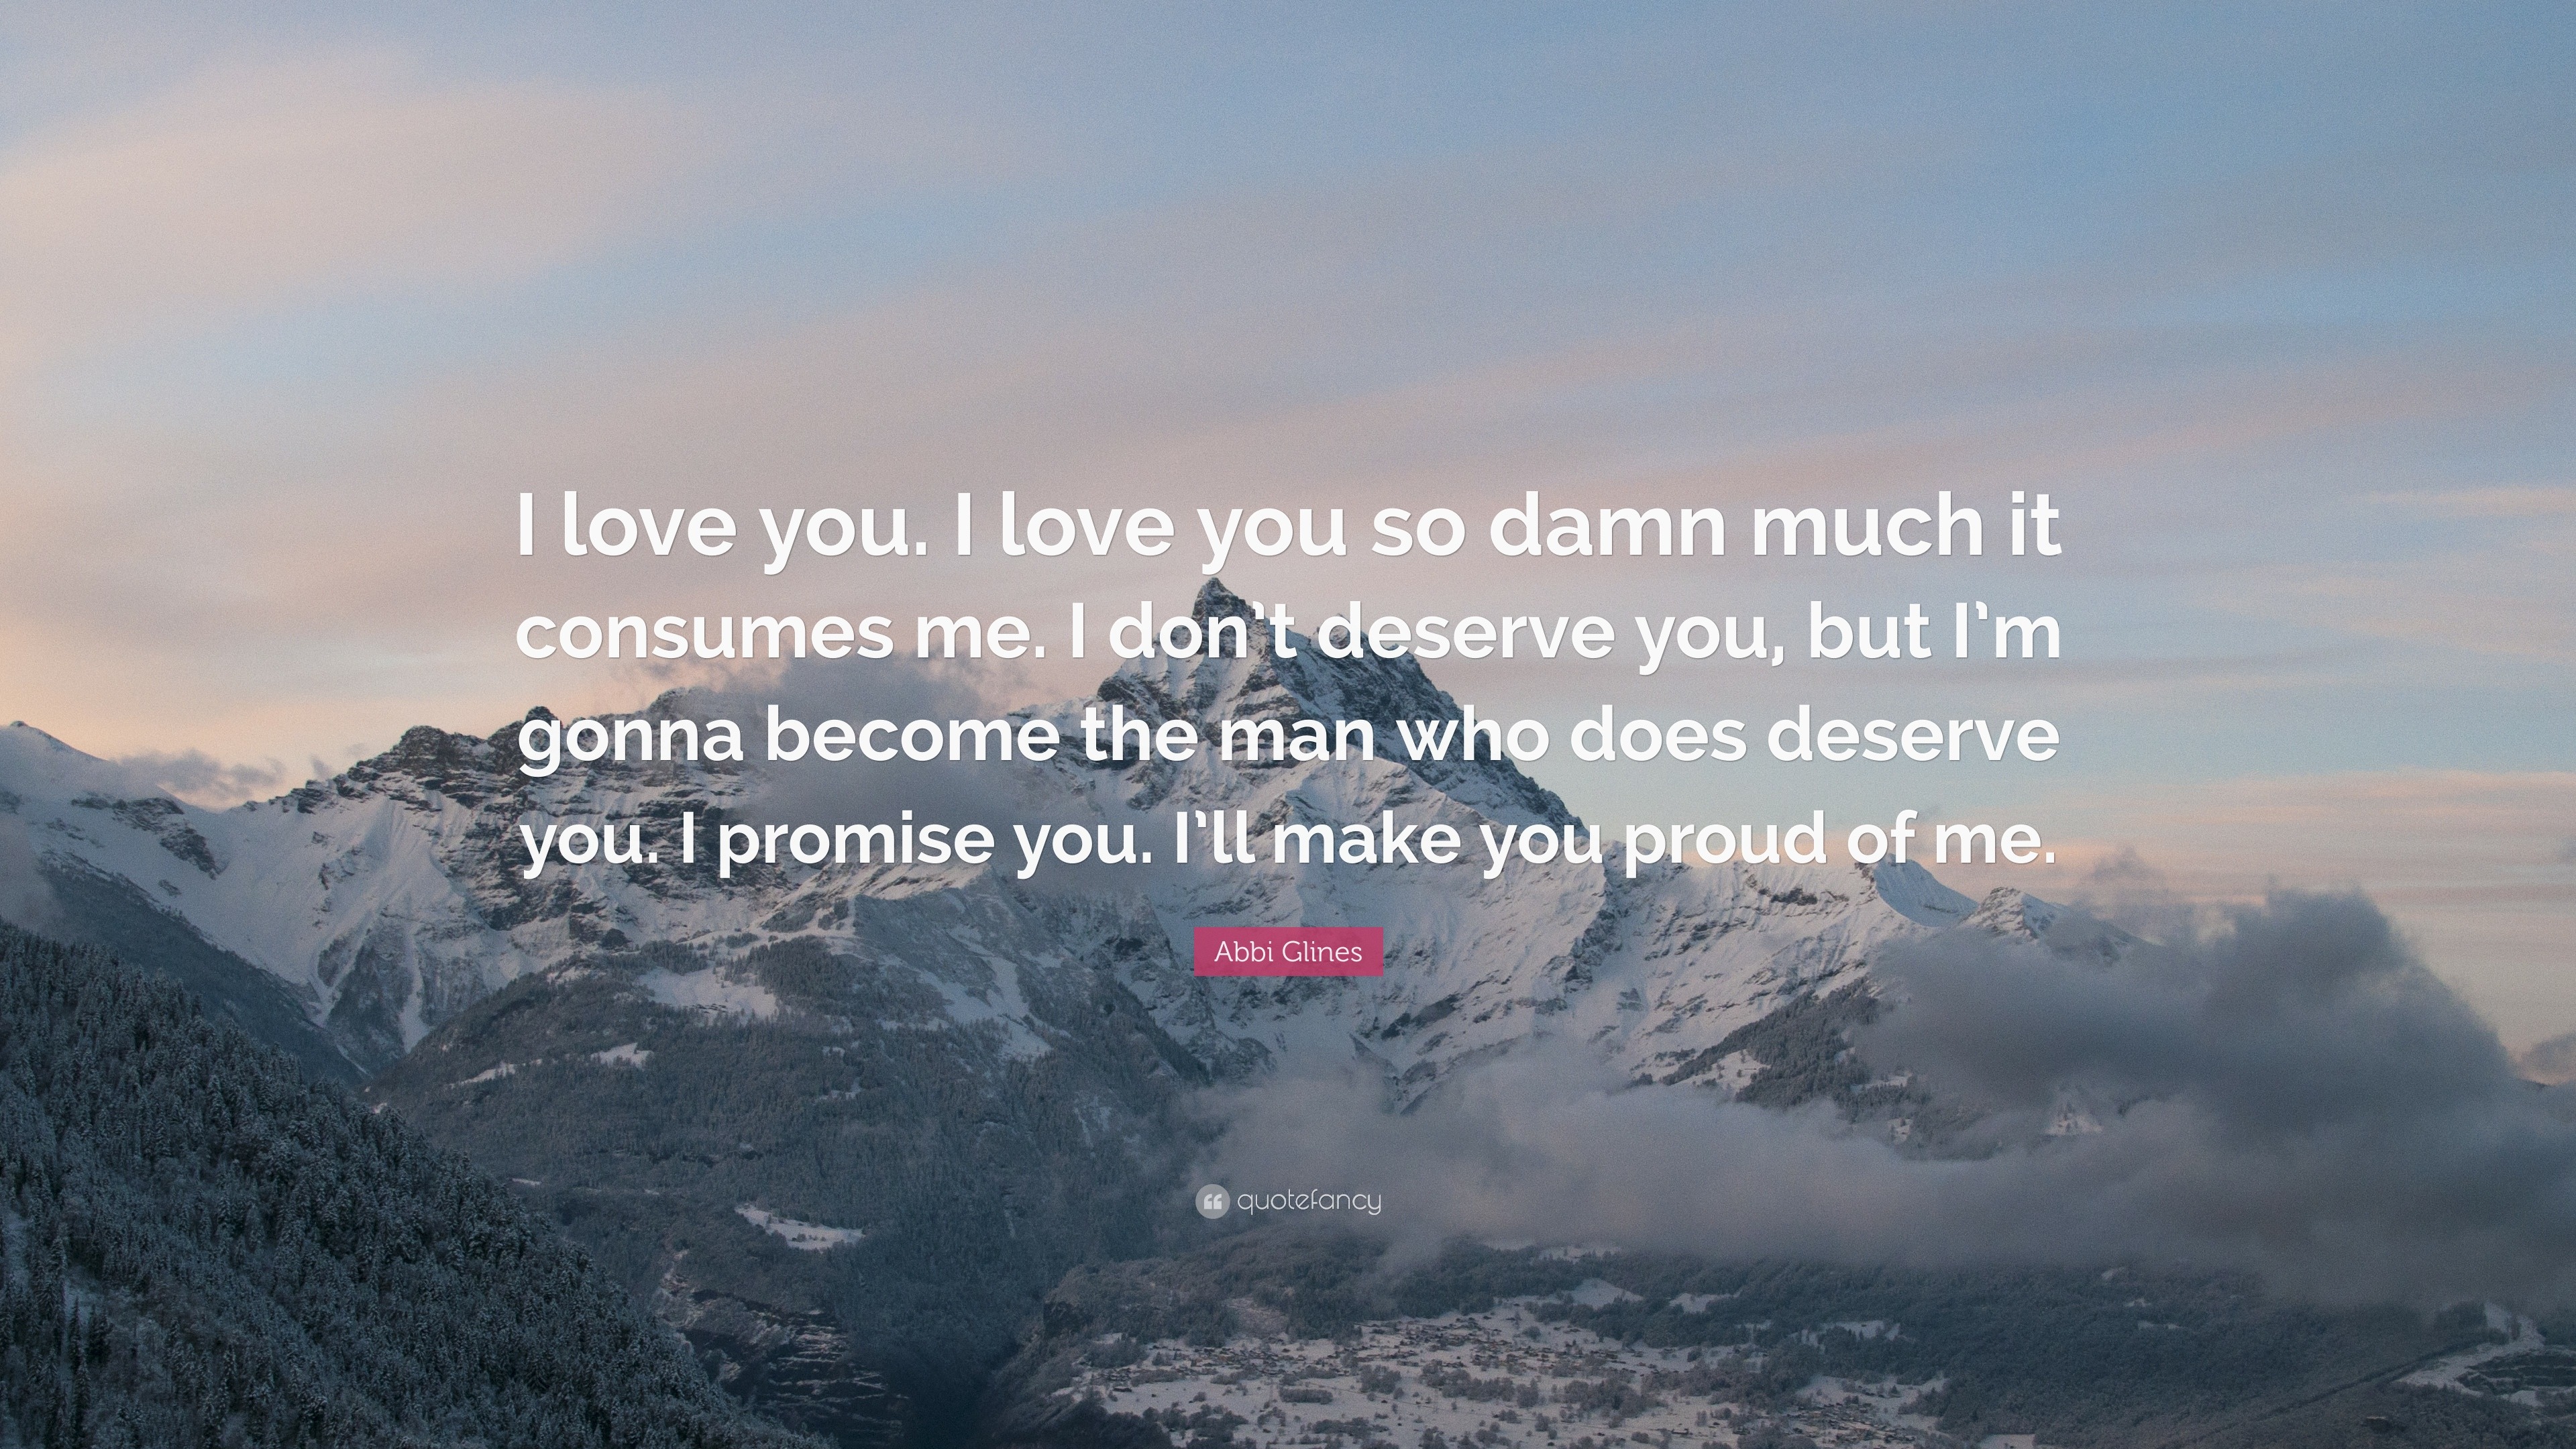 Abbi Glines Quote: “I love you. I love you so damn much it consumes me ...